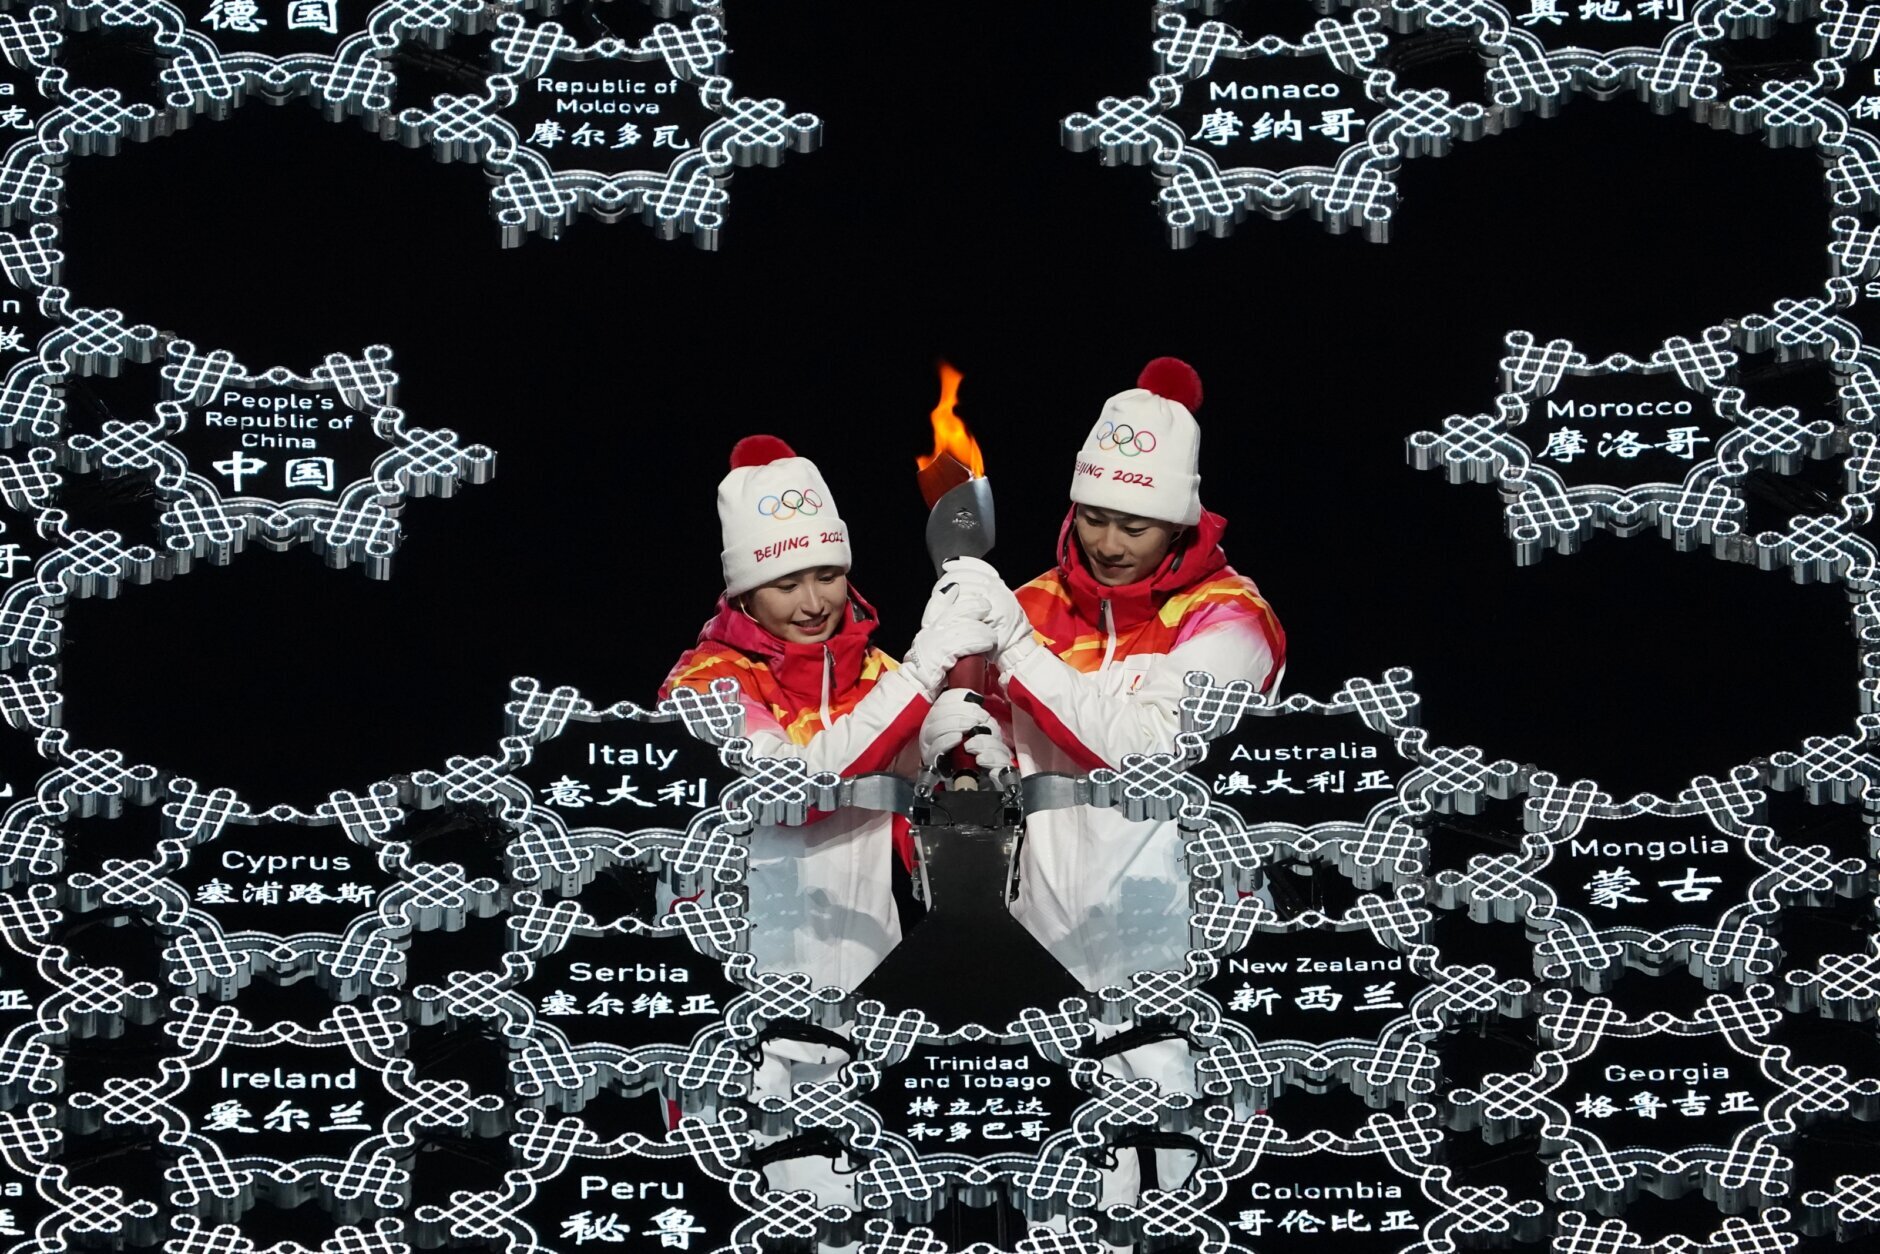 China's athletes Dinigeer Yilamujian and Zhao Jiawen light the cauldron during the opening ceremony of the 2022 Winter Olympics, Friday, Feb. 4, 2022, in Beijing. (AP Photo/Jae C. Hong)